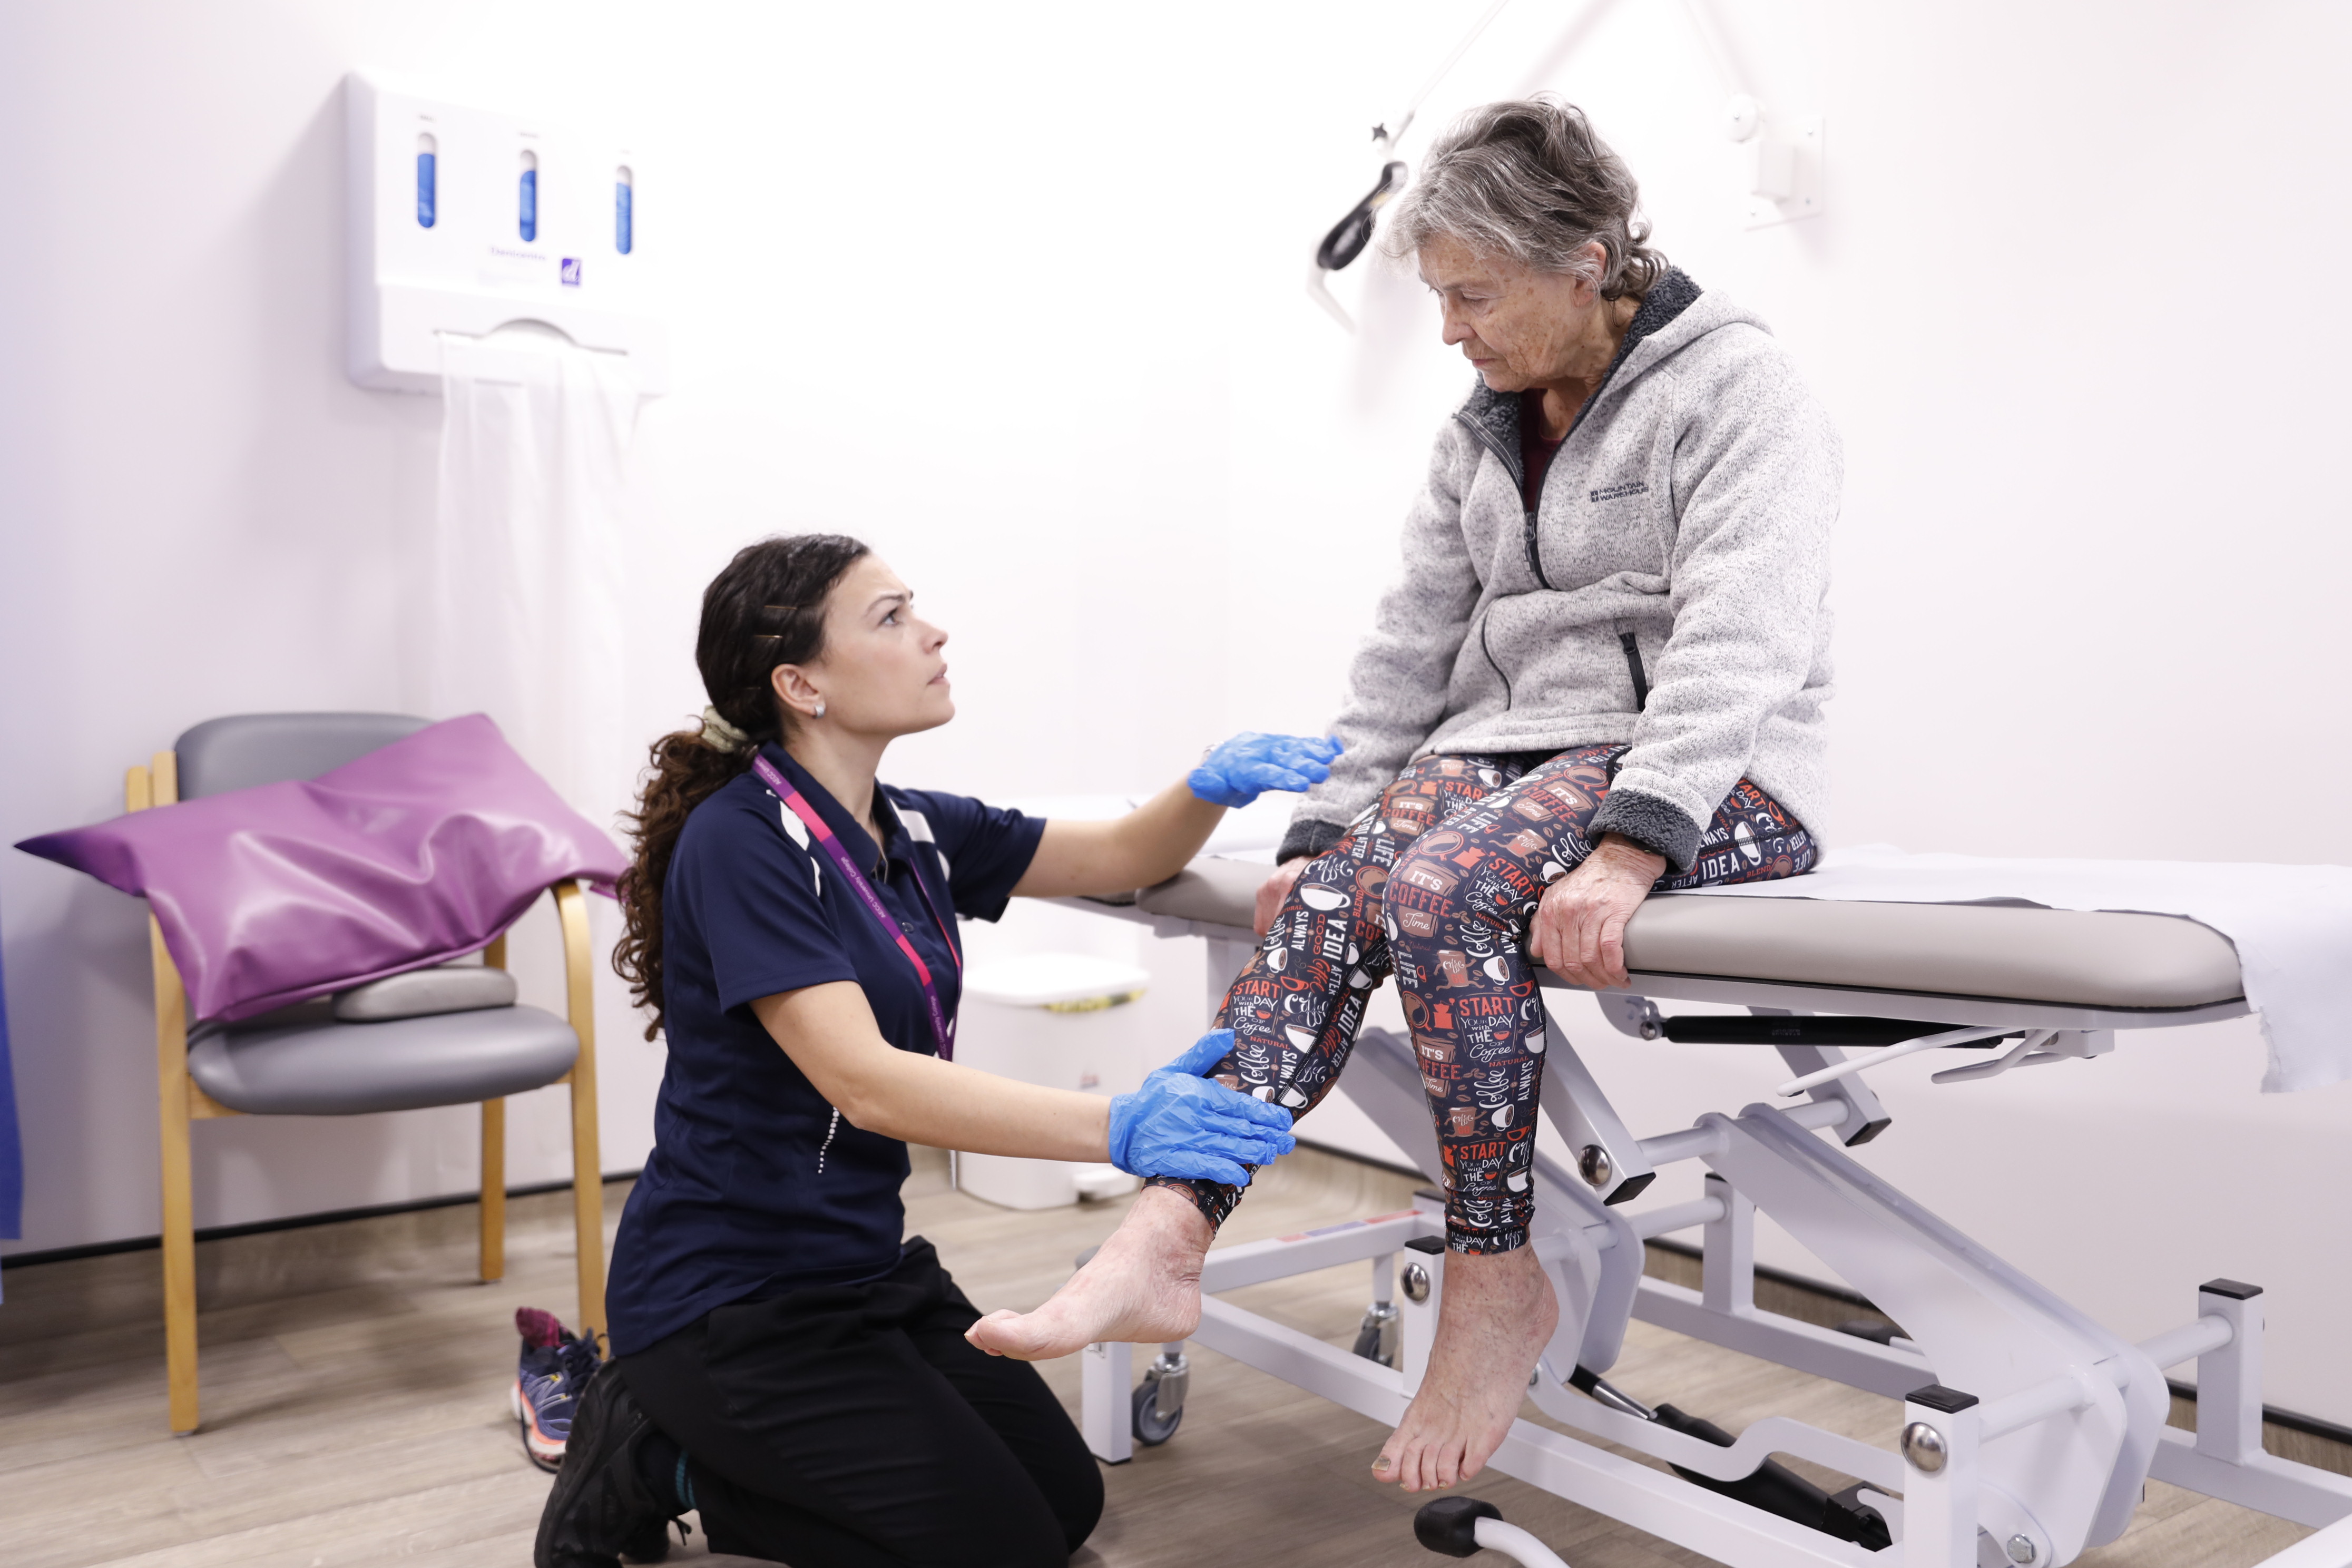 Physiotherapist crouched down looking intently up at patient on a physio bed, assessing her knee/leg